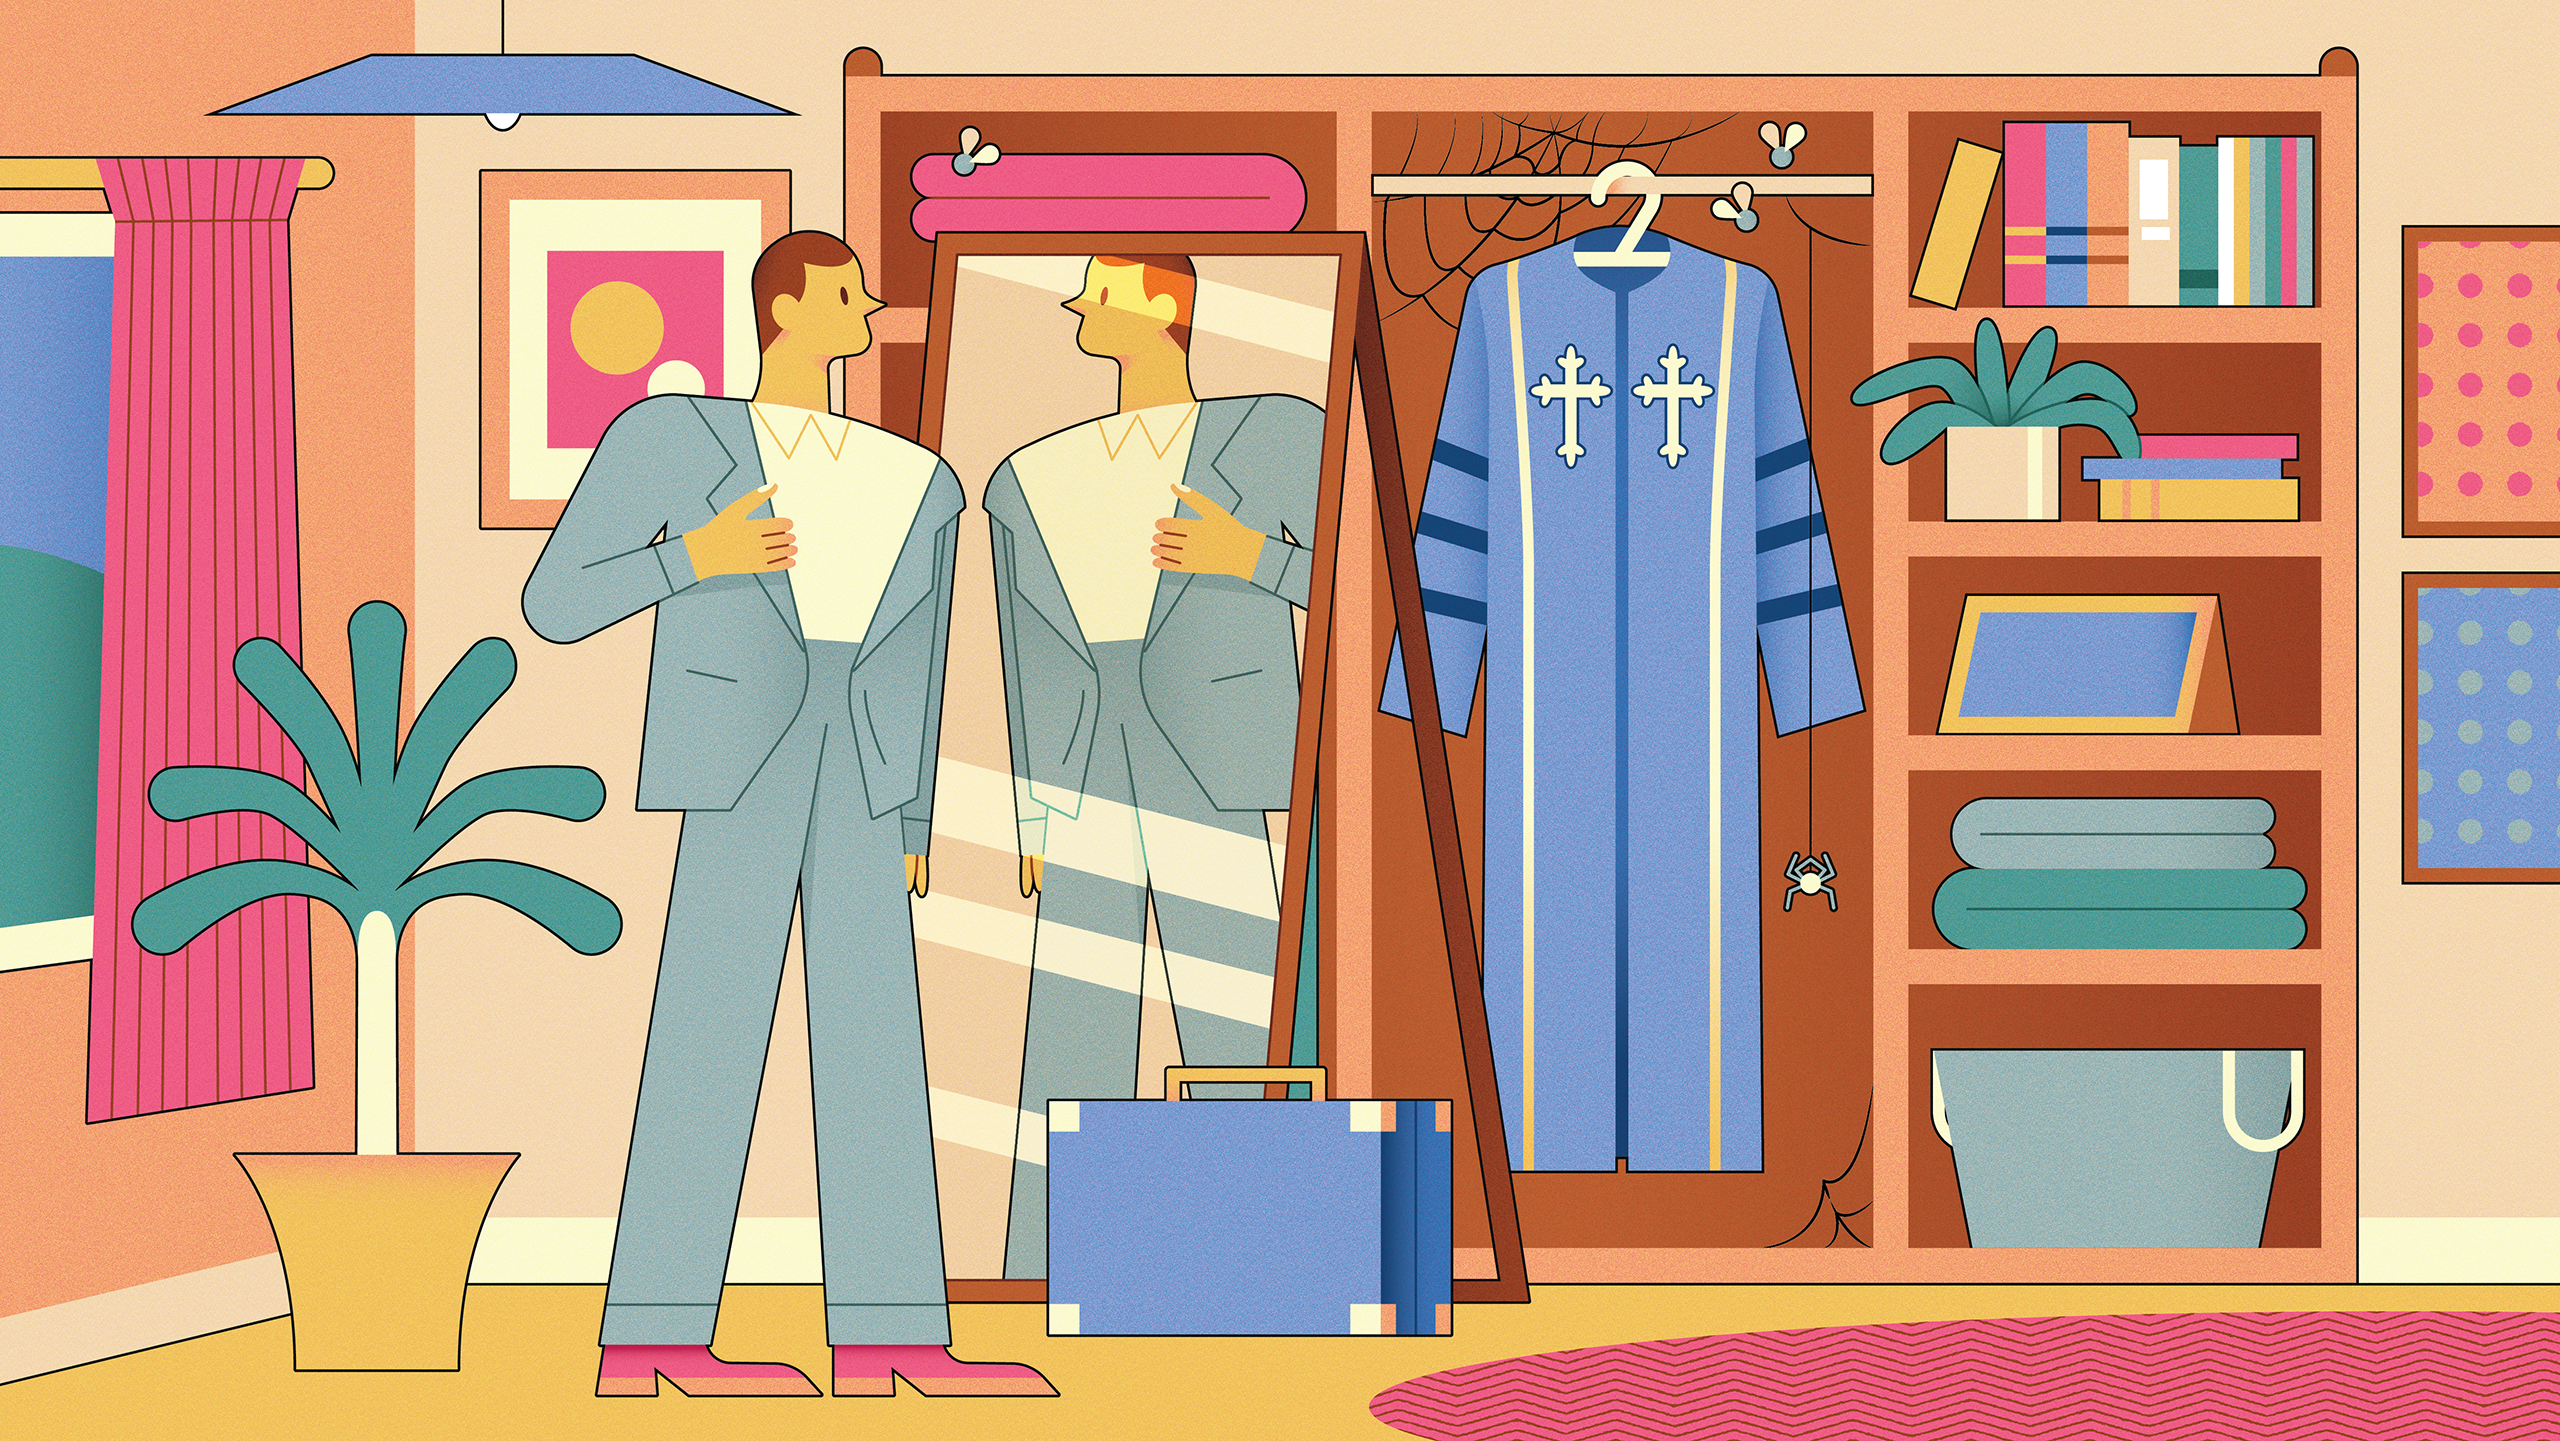 Illustration of a man putting on a suit while his old pastor robes hang in a closet with cobwebs.